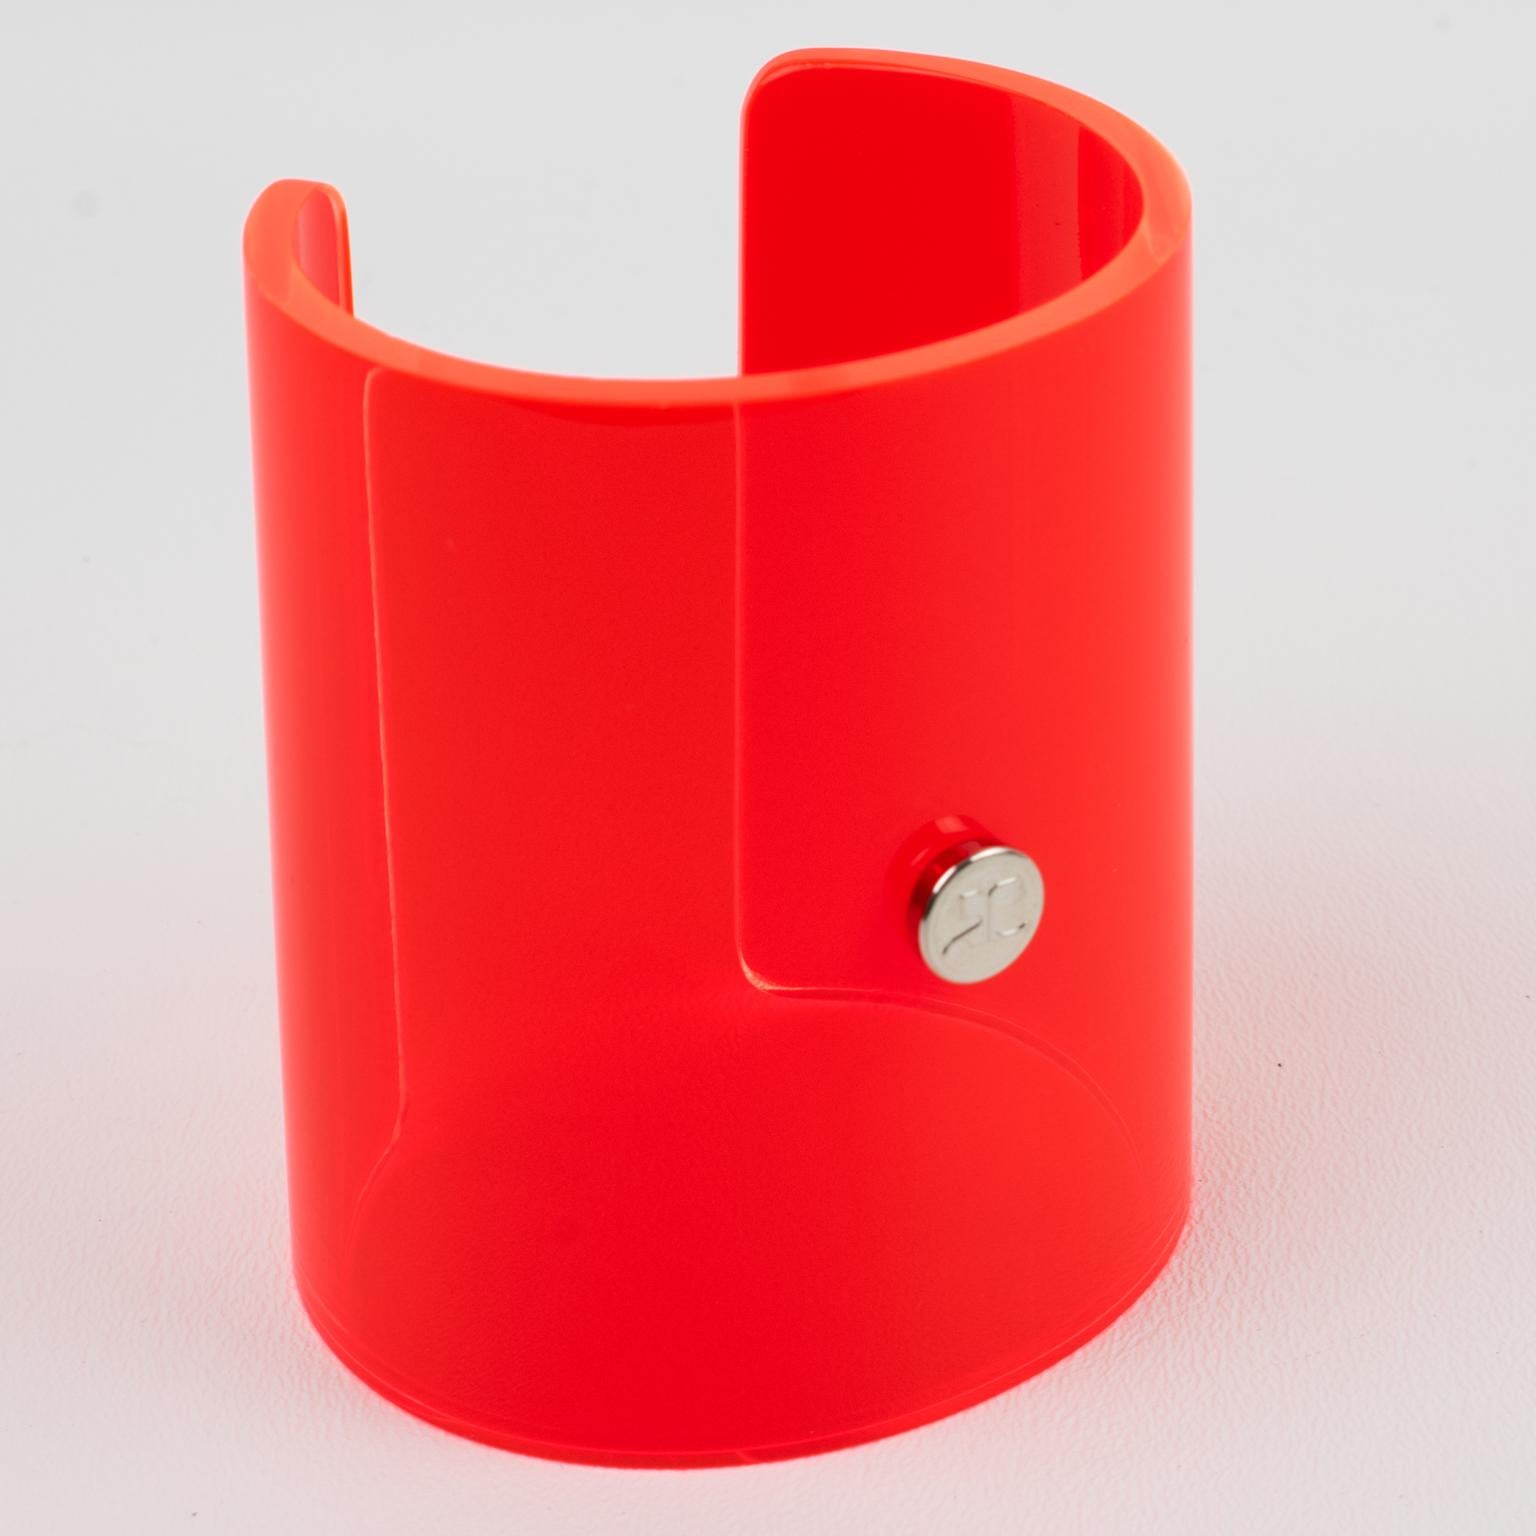 Courreges Paris designed this stunning Lucite or acrylic bangle bracelet. The oversized cuff design has a fully transparent neon orange color with a cone shape. The color is unusual and glows in the dark. The cuff is signed on the front with the